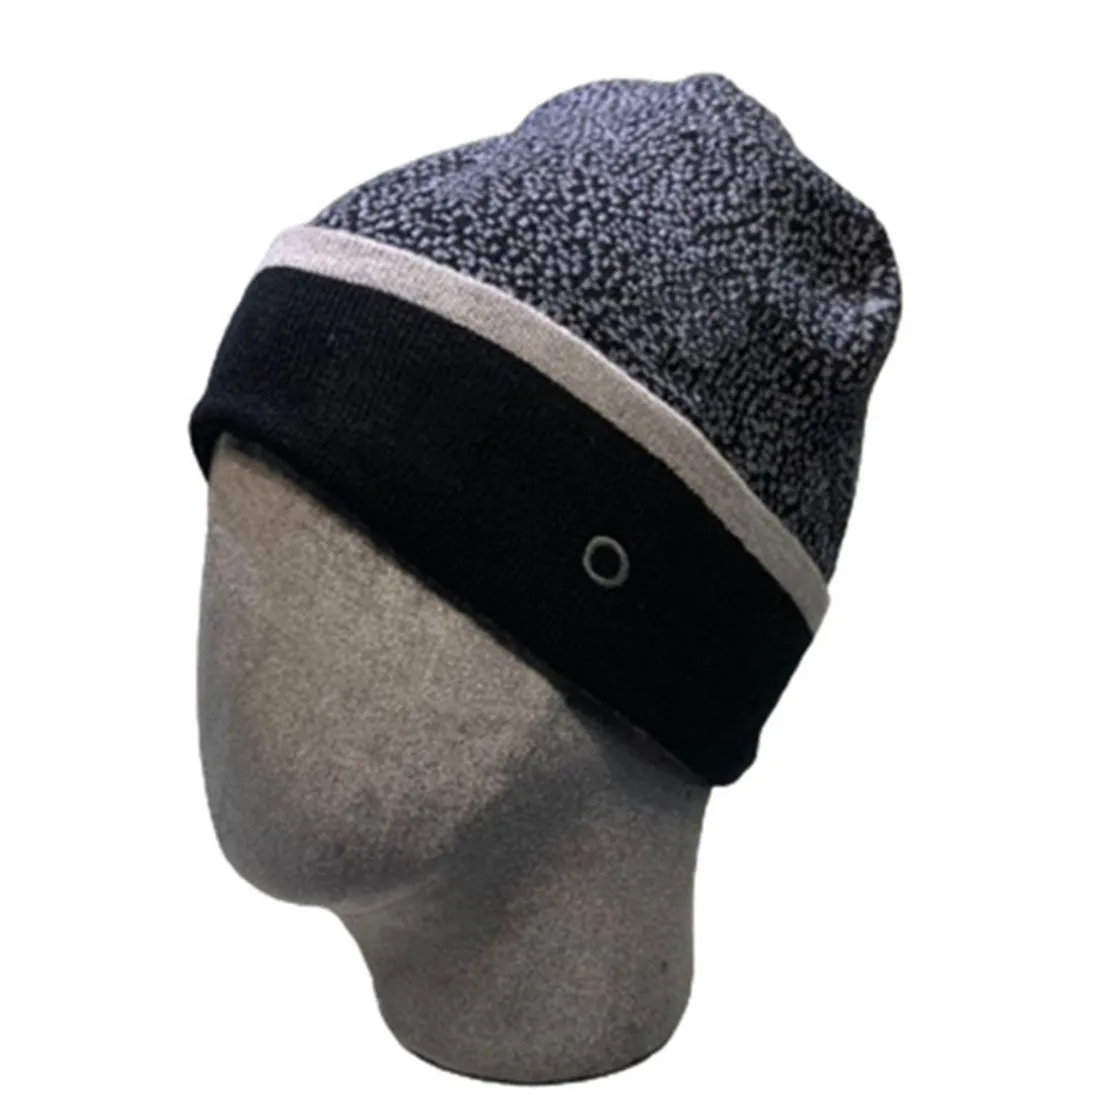 New Luxury Knitted Hat Designer Beanie Cap Mens Moner Fitted Hats Unisex Cashmere Letters Casual Skull Caps Outdoor Fashion 9 Colors G-3